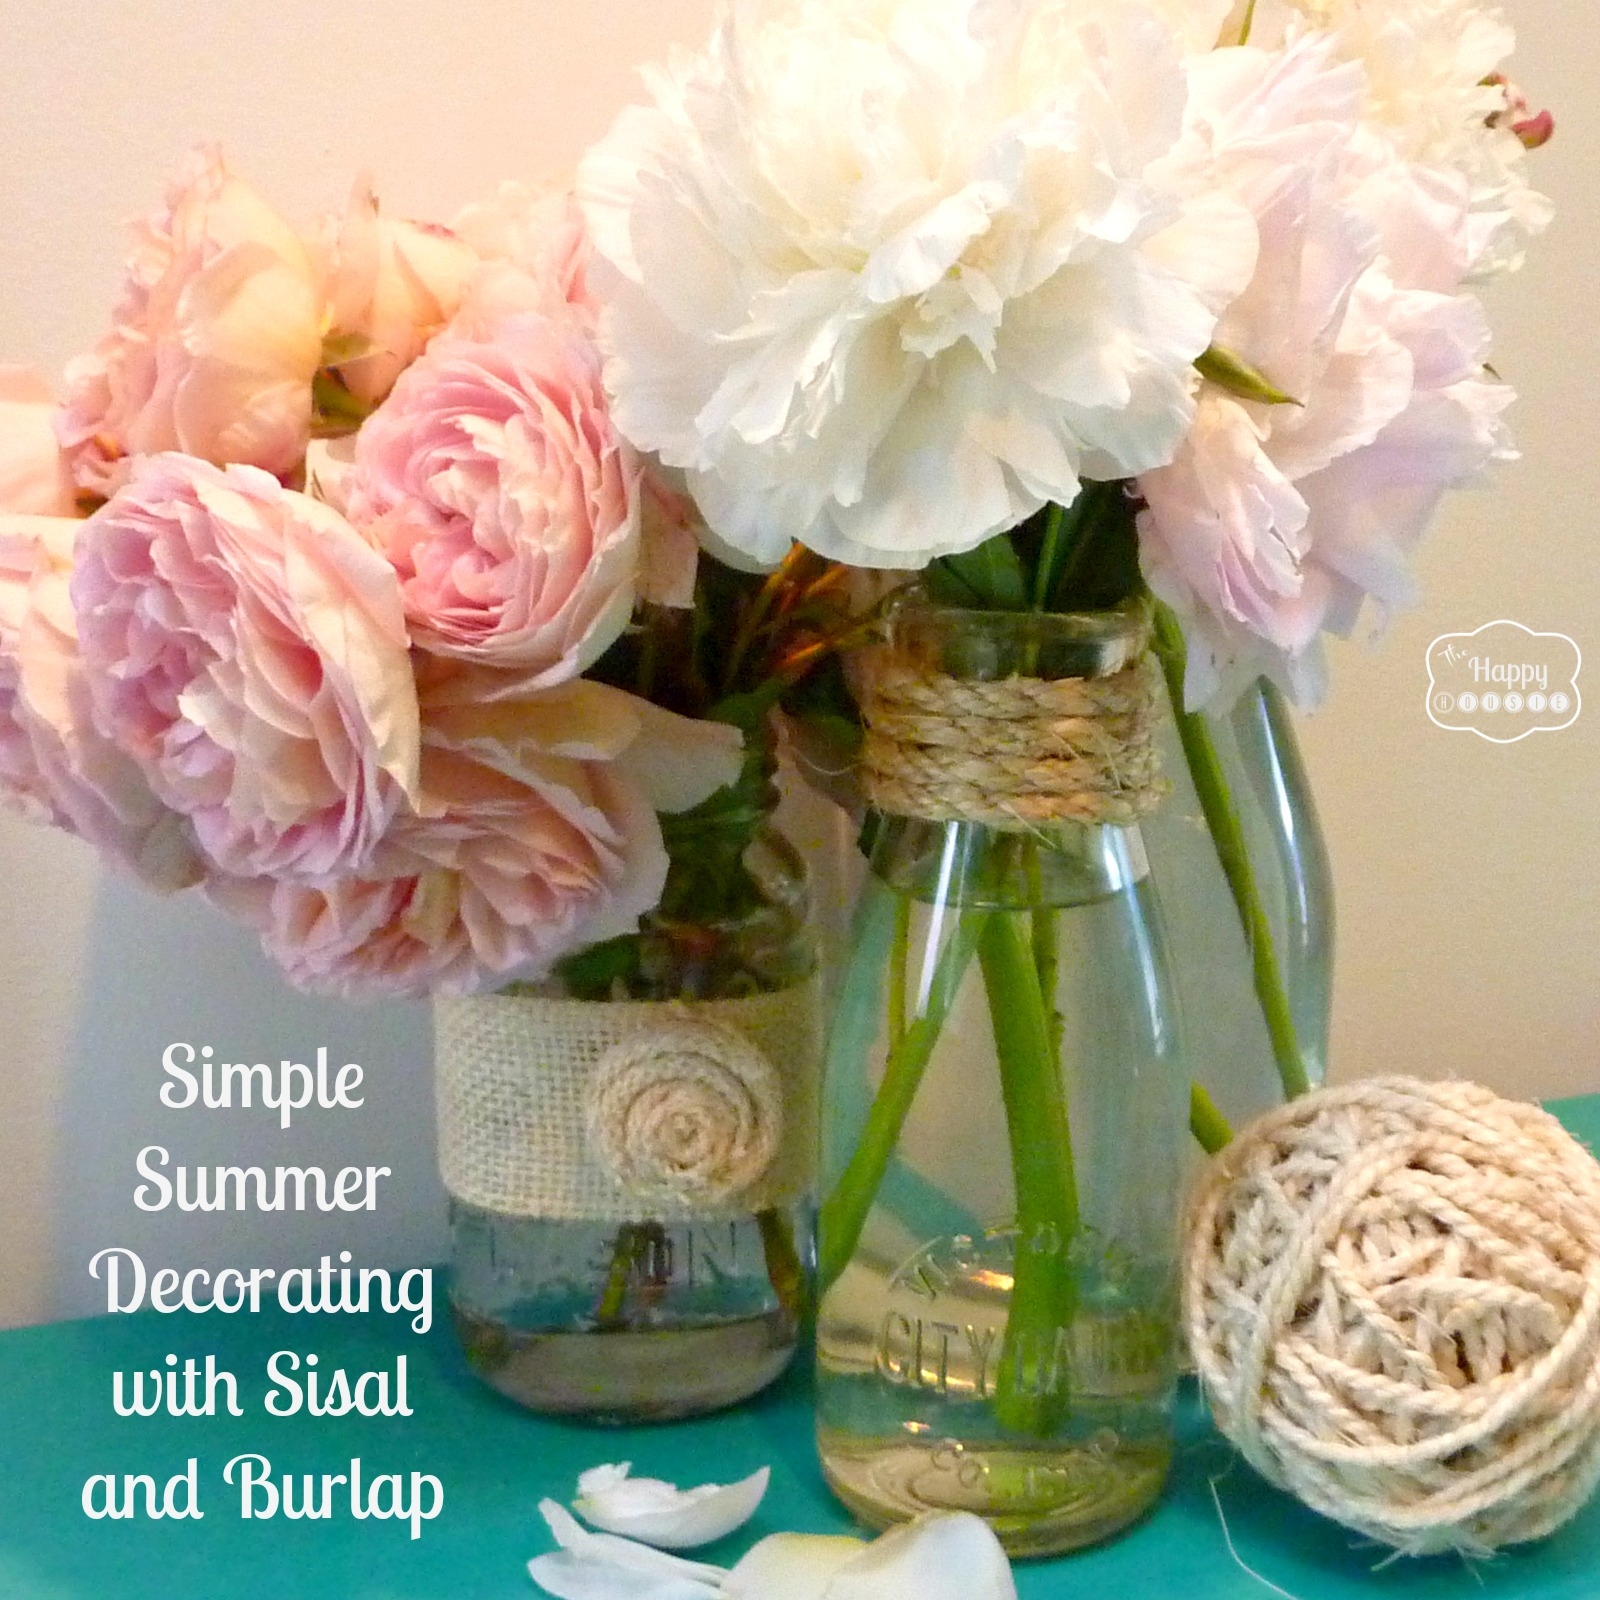 Simple Summer Decorating with Sisal, Burlap, and Blooms